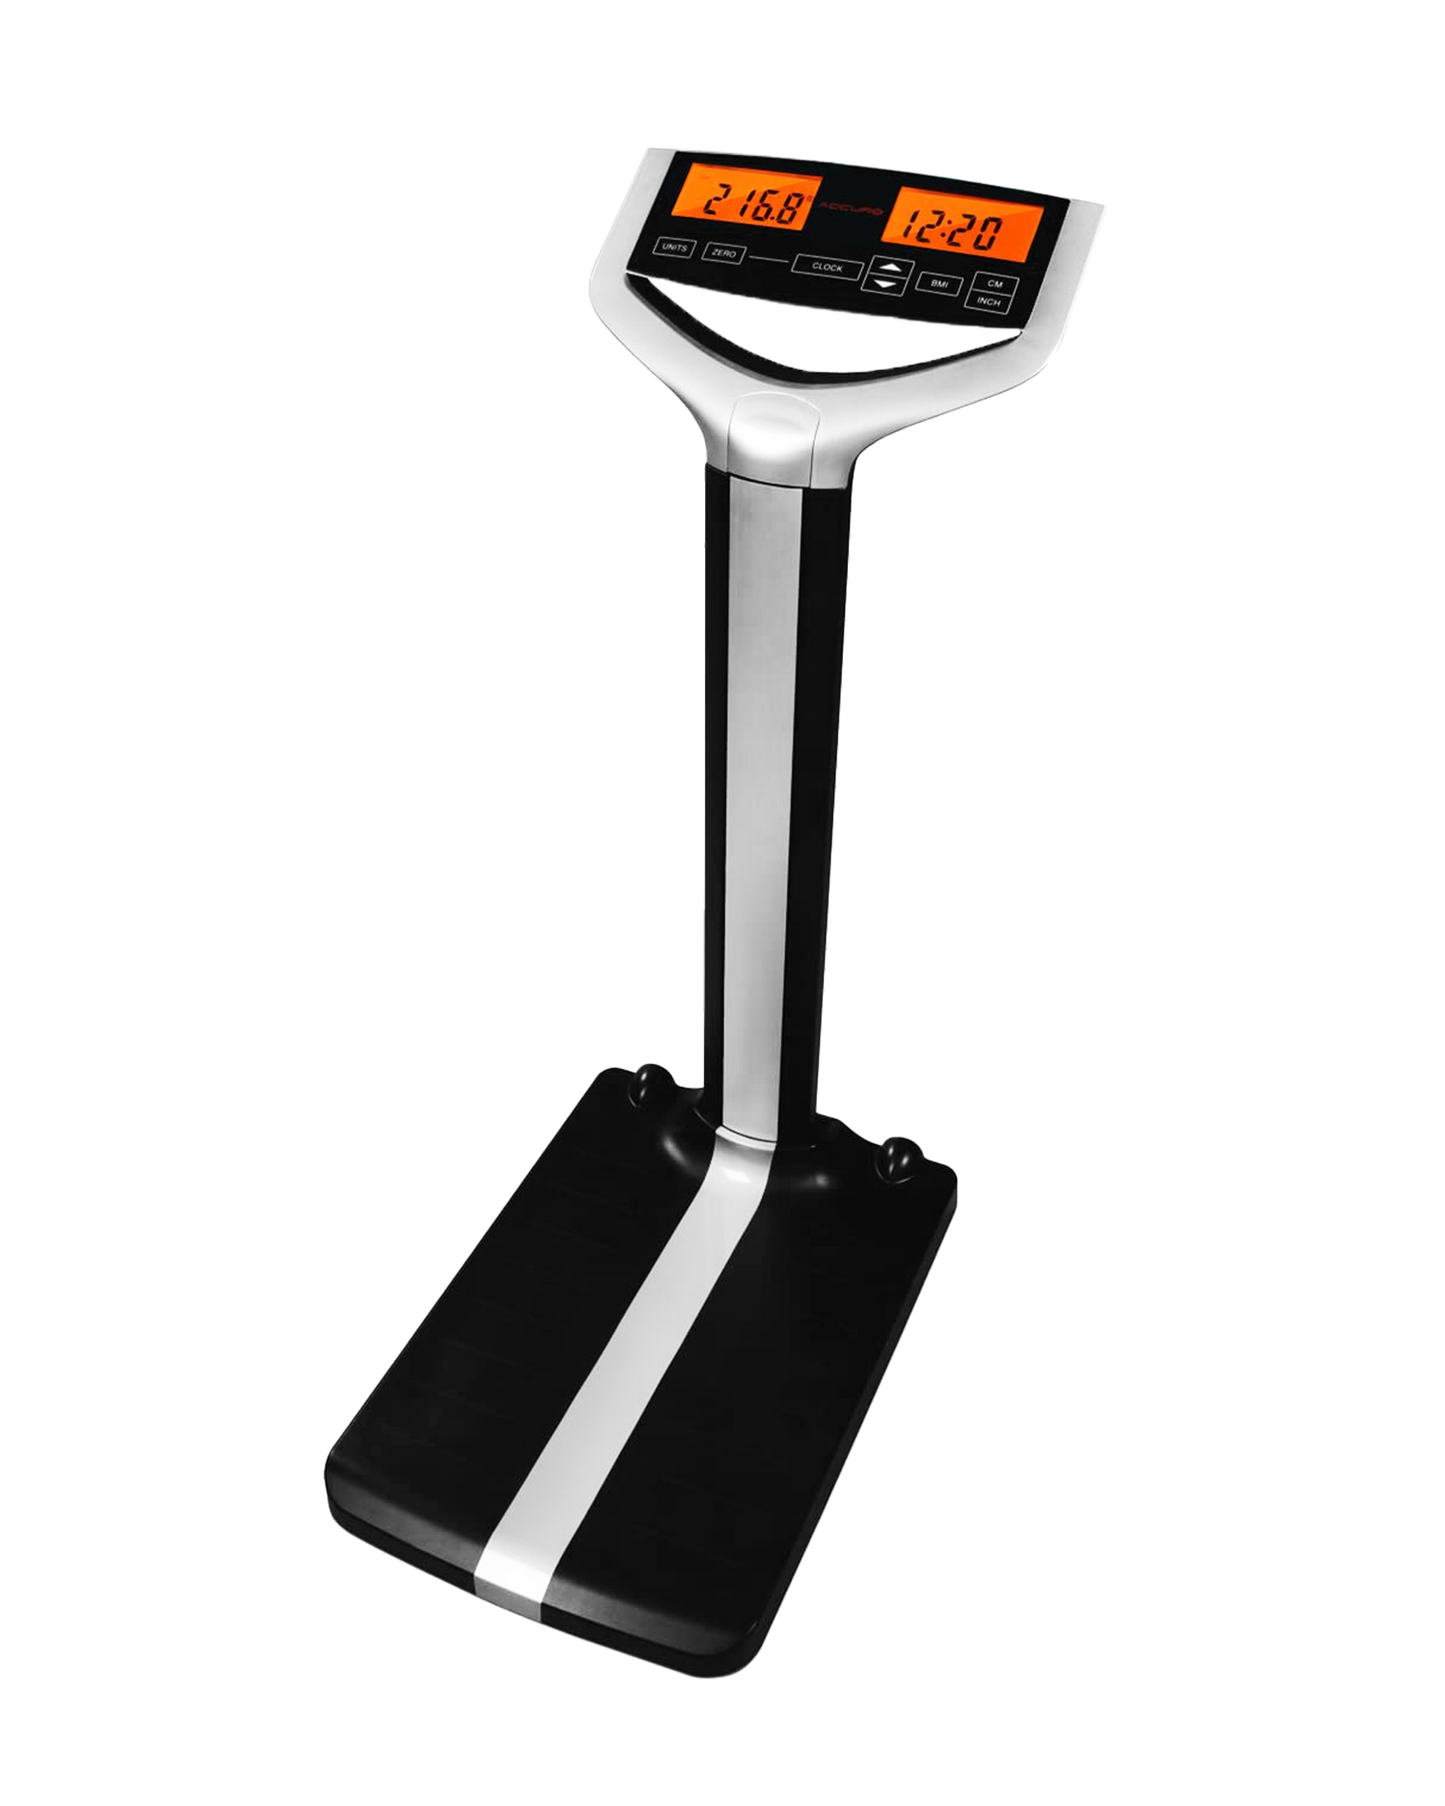 Accuro Waist Level Digital Scale with 500 lb Capacity and BMI Scale (D – BV  Medical